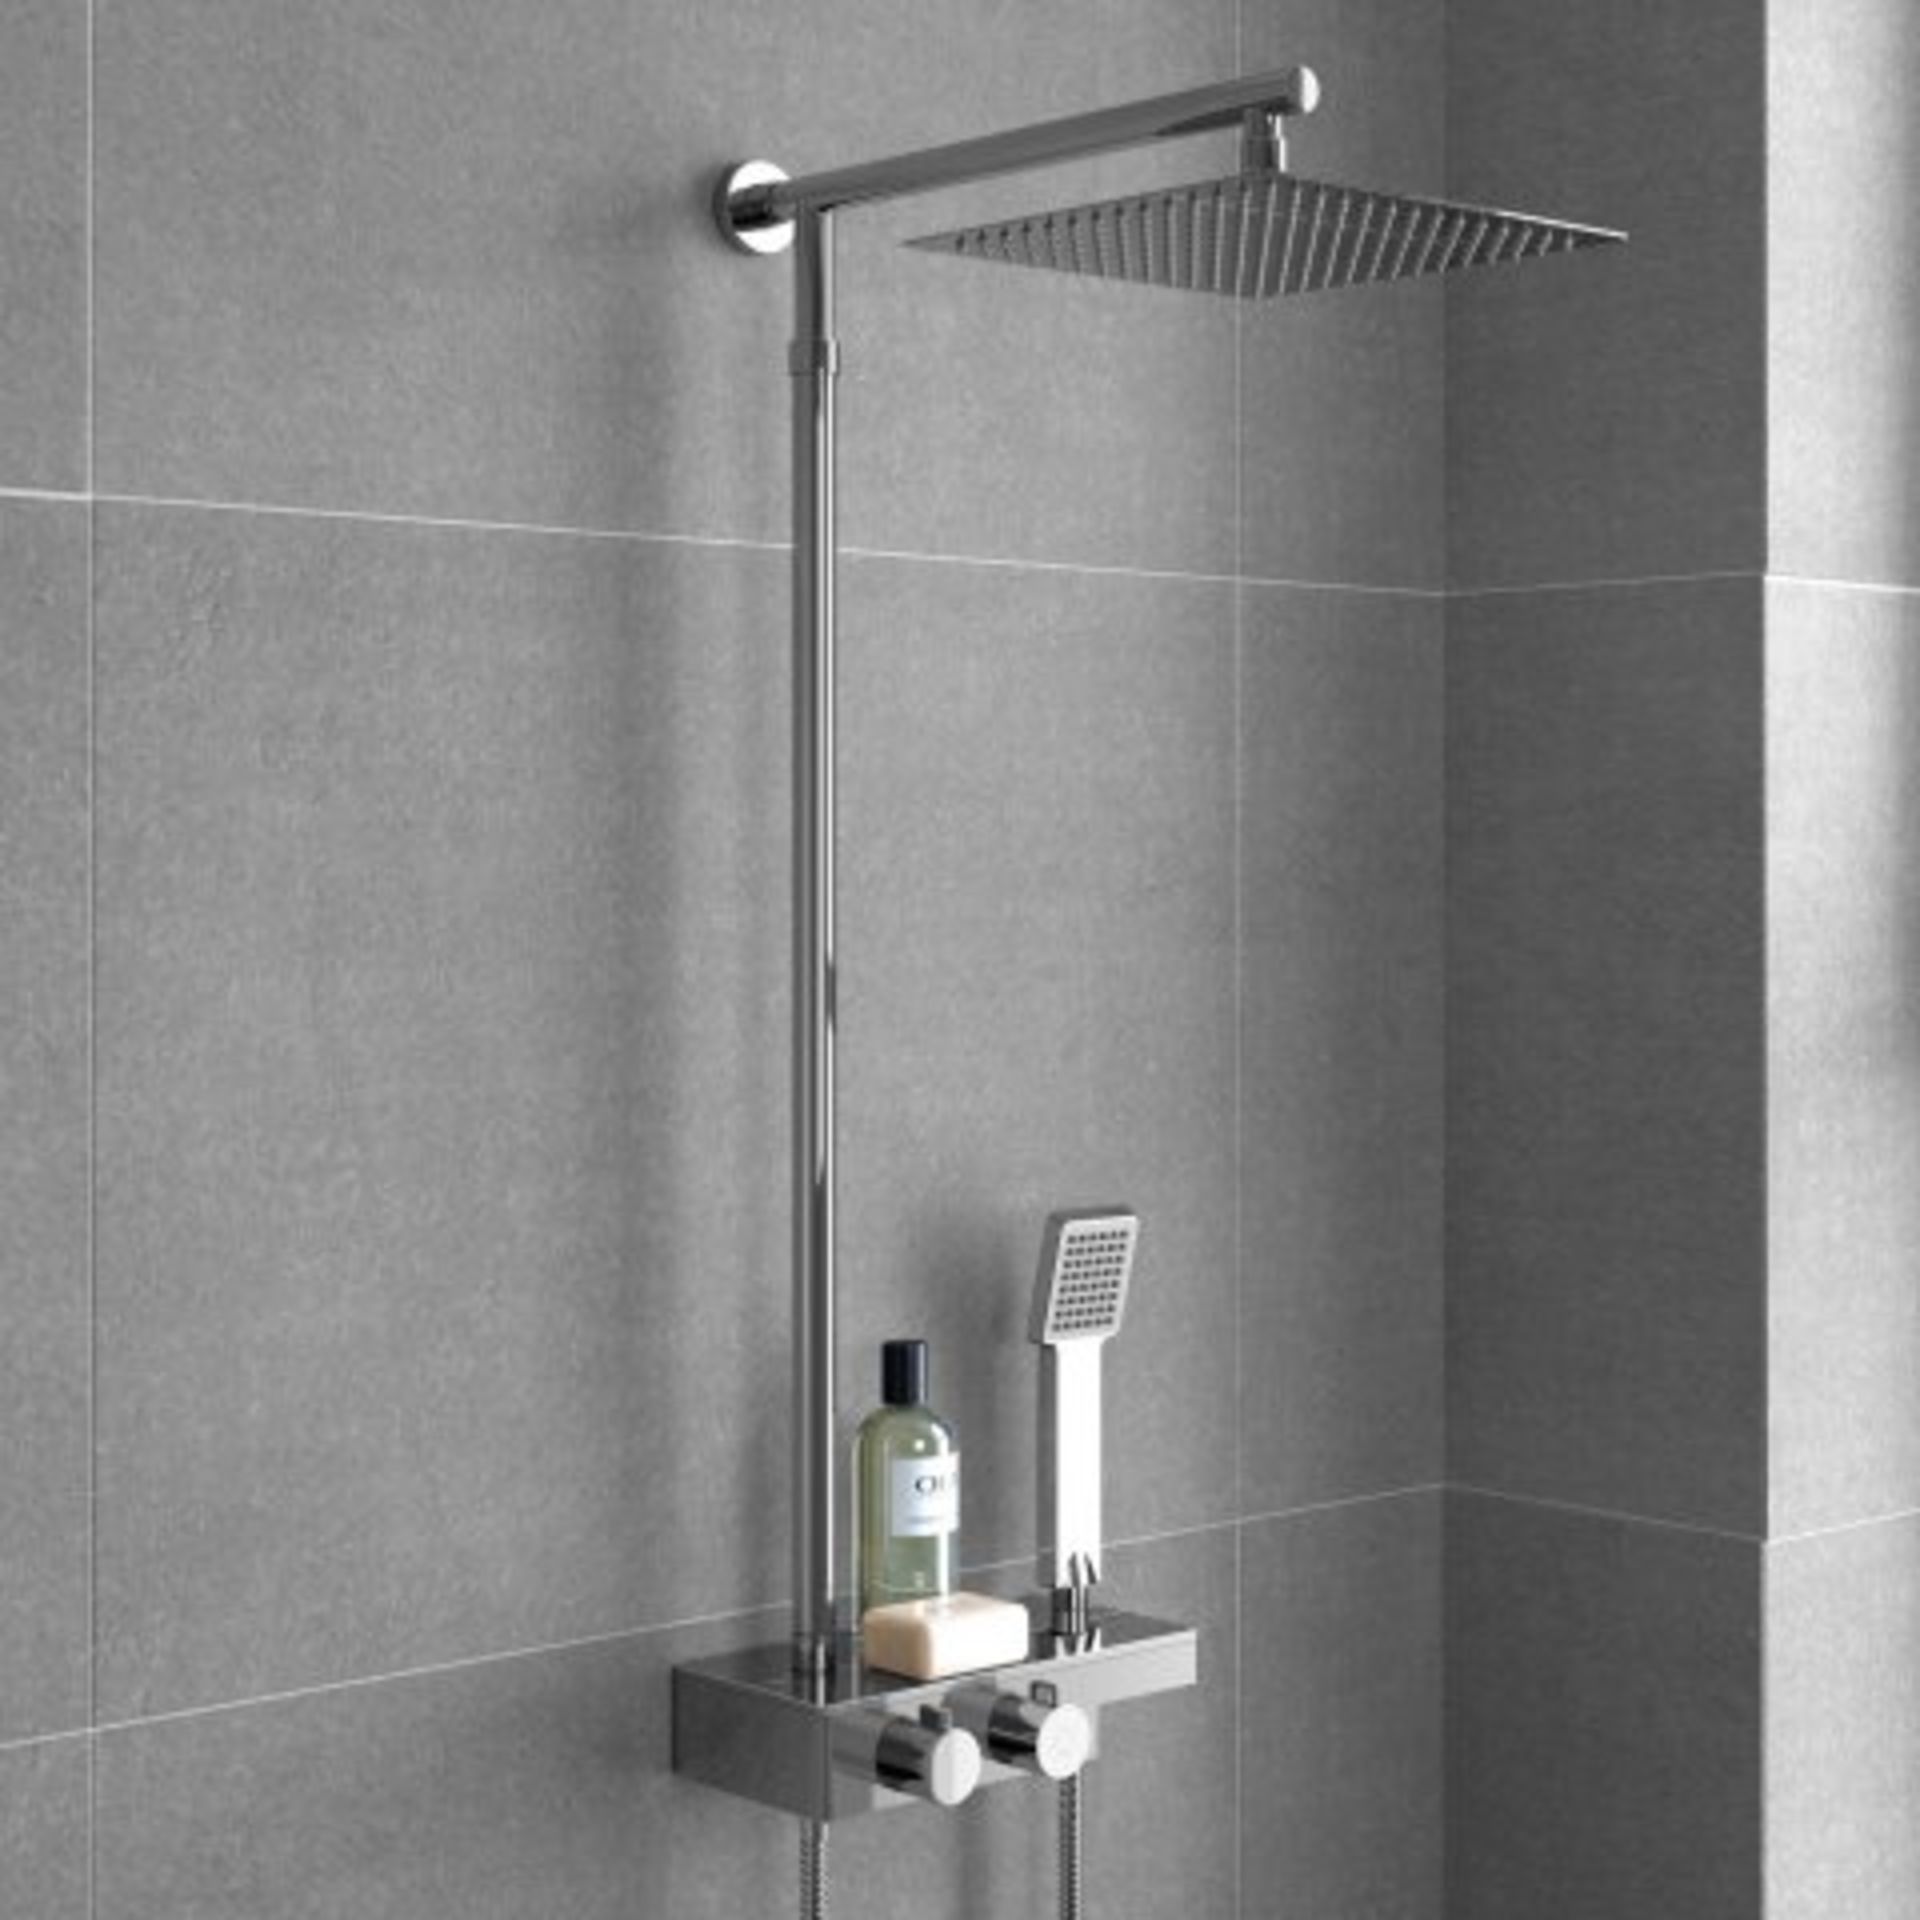 (N61) 250mm Large Square Head Thermostatic Exposed Shower Kit, Handheld & Storage Shelf. RRP £349. - Image 2 of 5